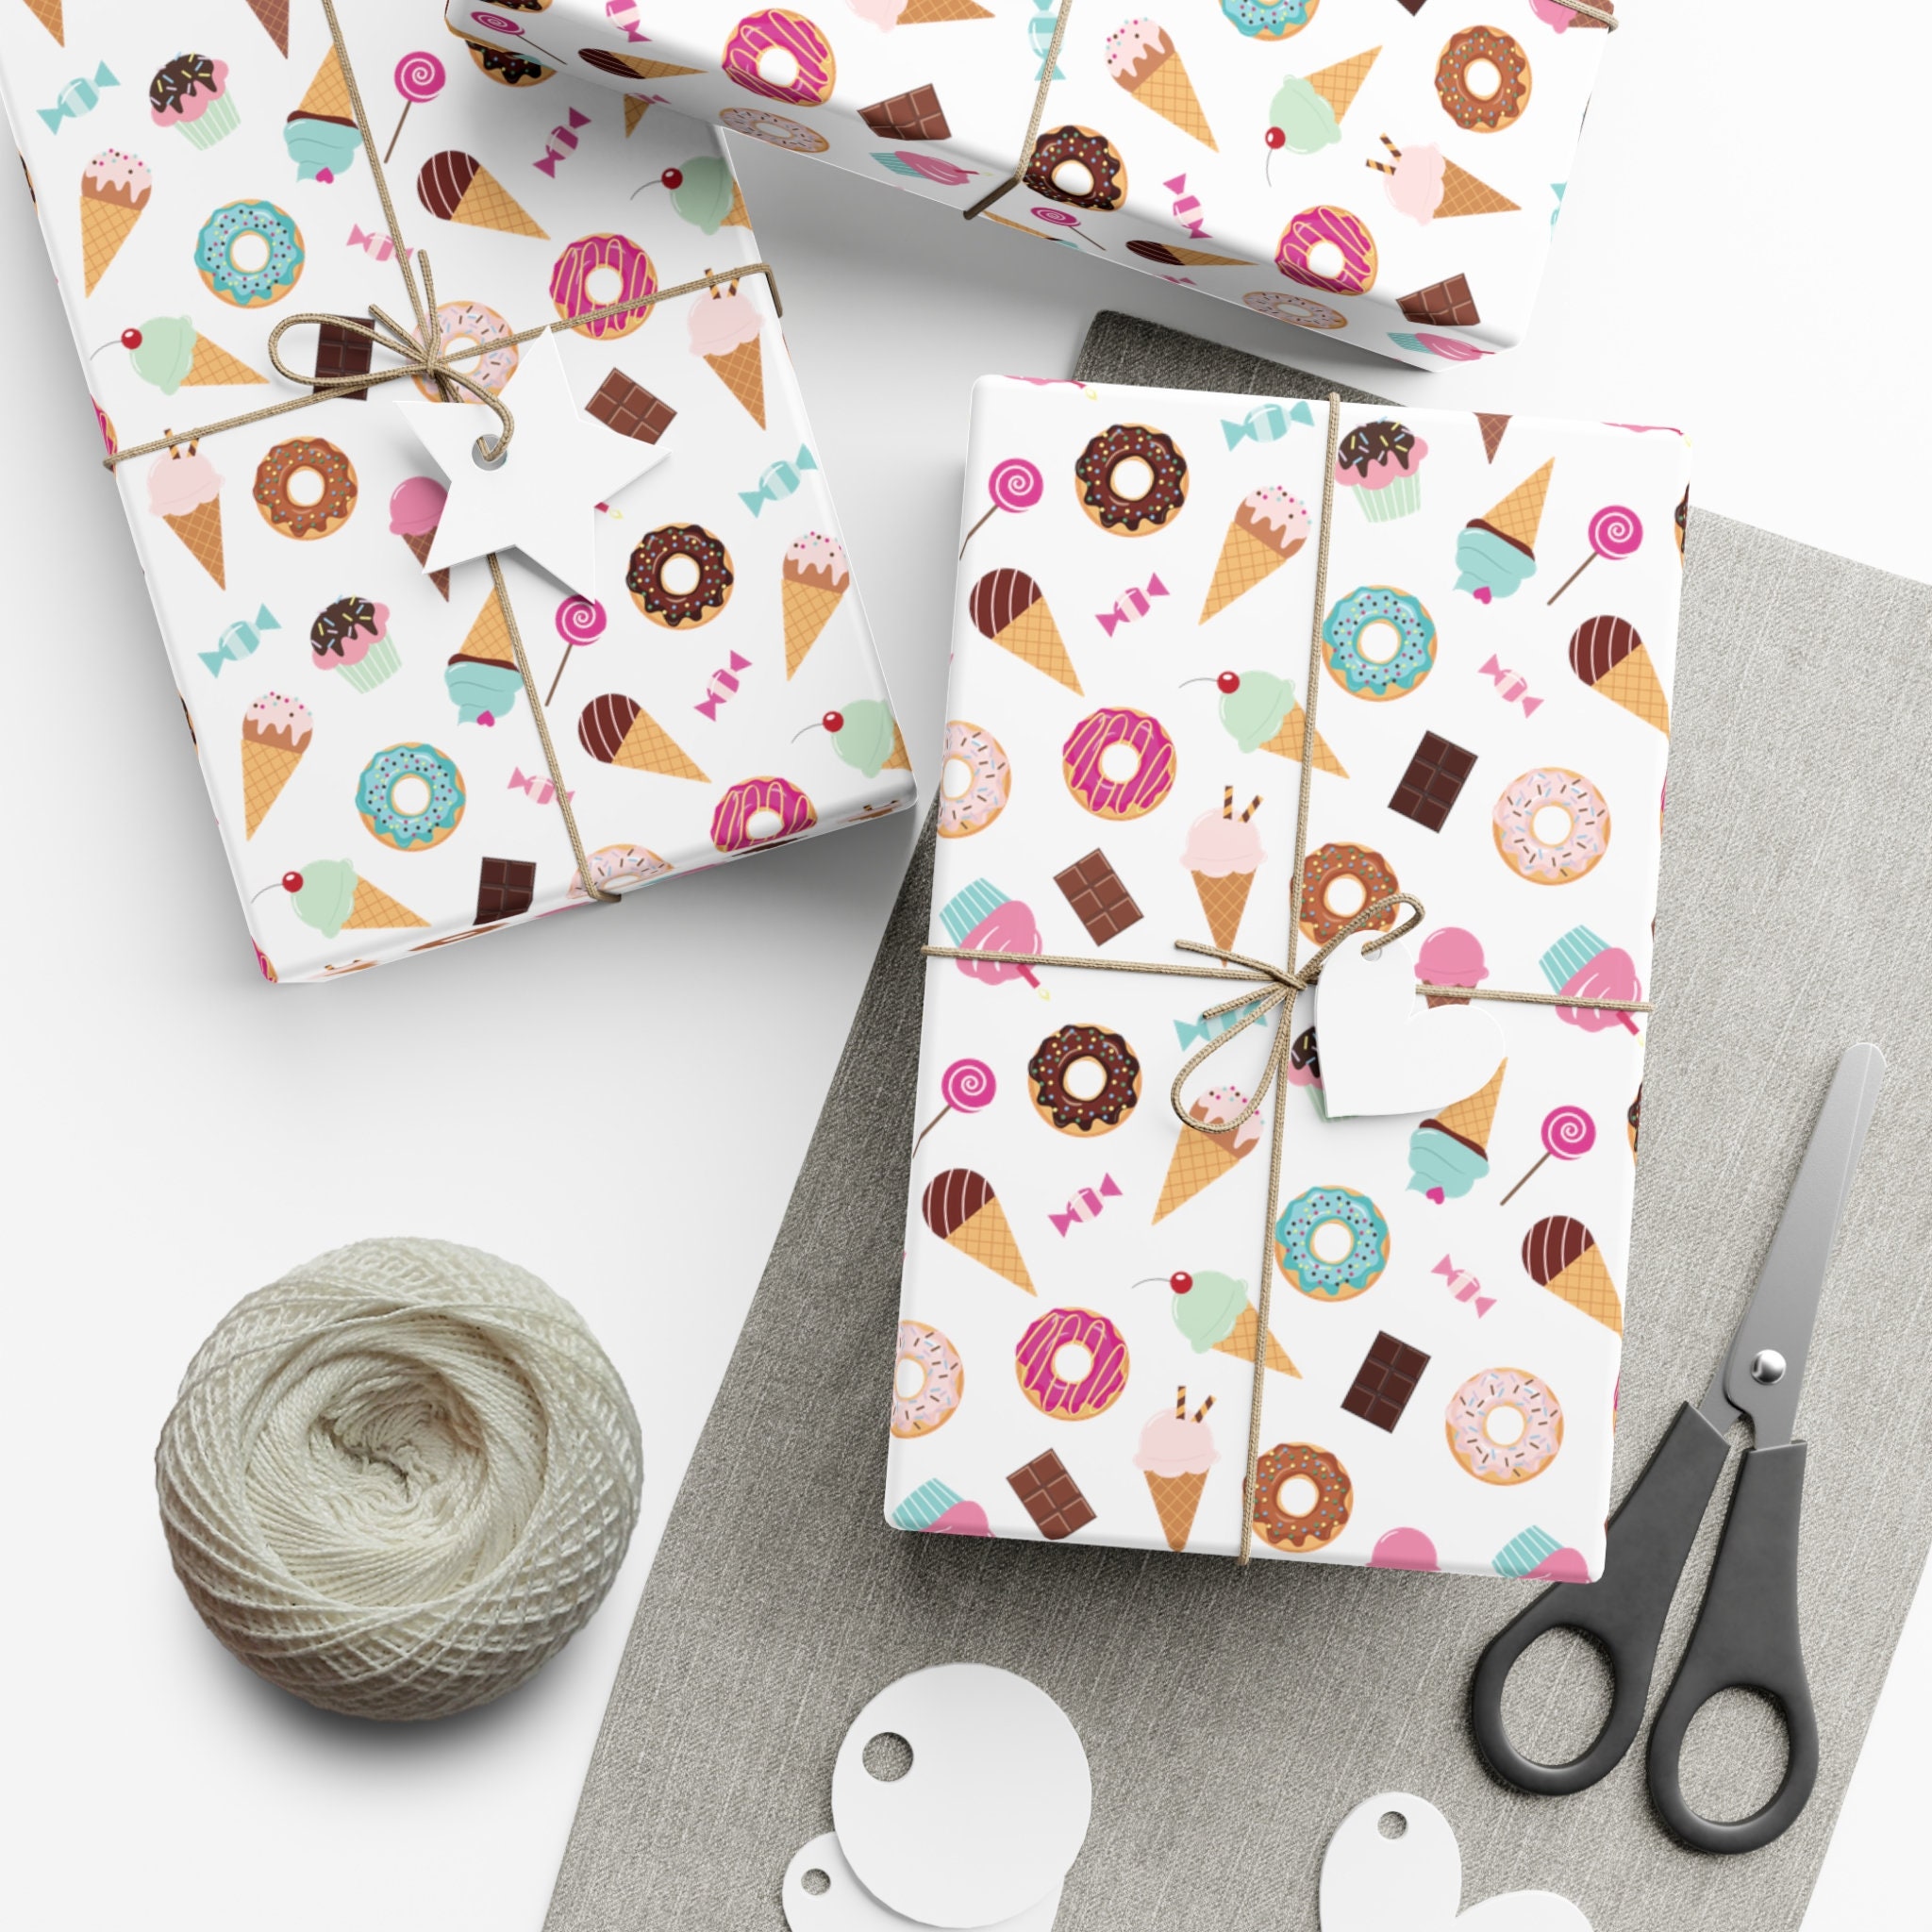 Black dots over cream background Wrapping Paper by marufemia